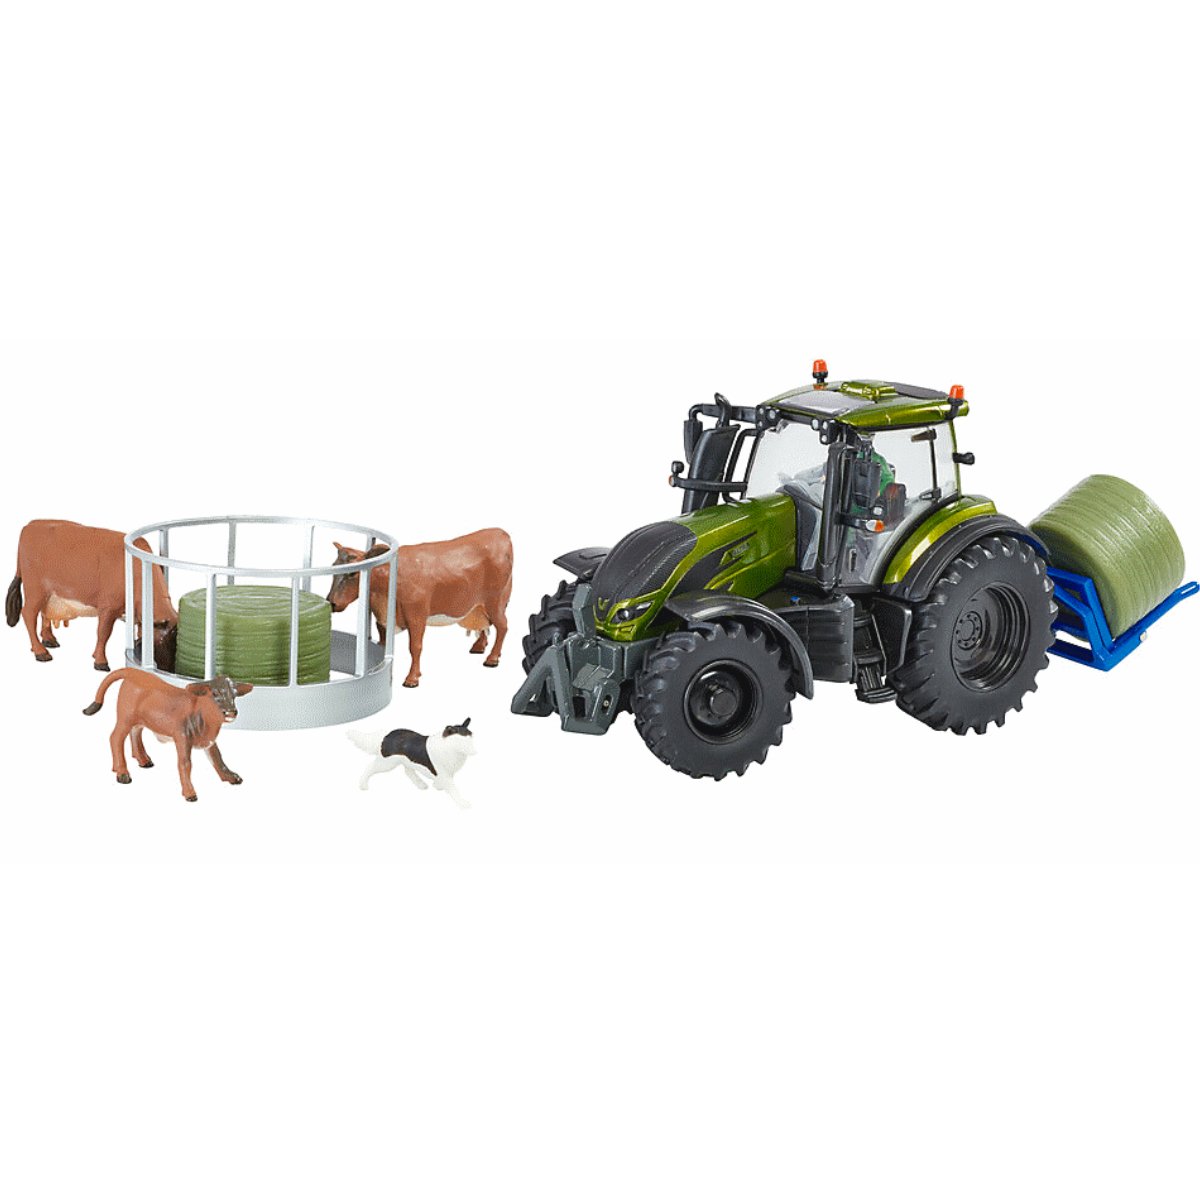 Britains Metallic Olive Green Valtra Playset - 1:32 Scale - Phillips Hobbies